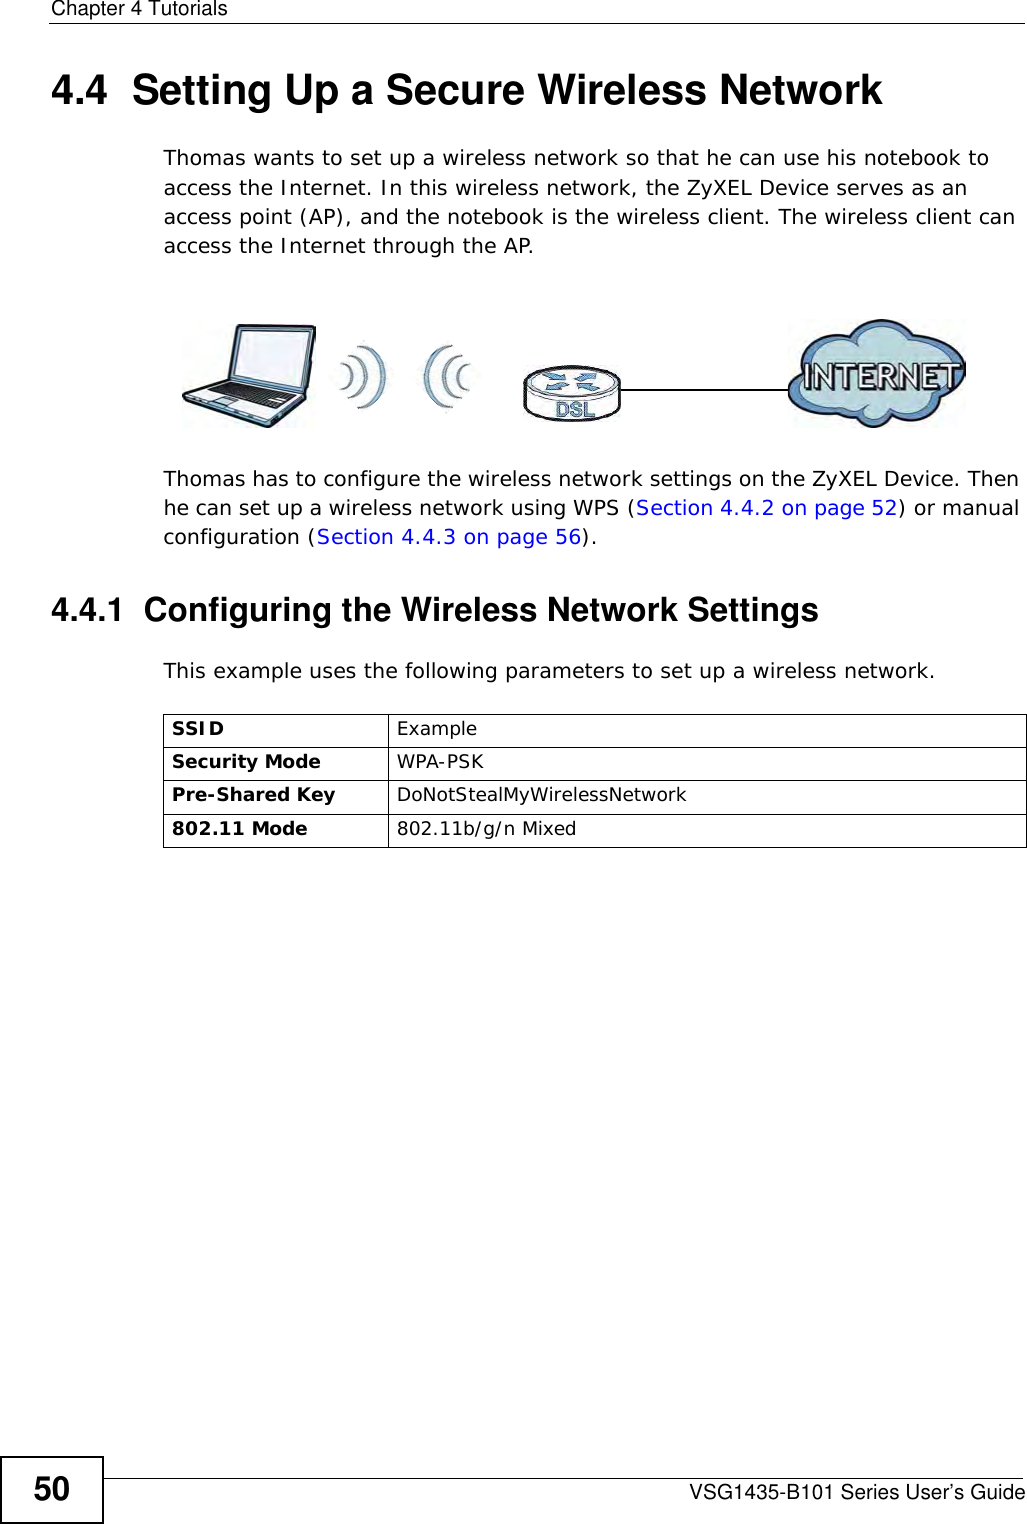 Chapter 4 TutorialsVSG1435-B101 Series User’s Guide504.4  Setting Up a Secure Wireless NetworkThomas wants to set up a wireless network so that he can use his notebook to access the Internet. In this wireless network, the ZyXEL Device serves as an access point (AP), and the notebook is the wireless client. The wireless client can access the Internet through the AP.Thomas has to configure the wireless network settings on the ZyXEL Device. Then he can set up a wireless network using WPS (Section 4.4.2 on page 52) or manual configuration (Section 4.4.3 on page 56).4.4.1  Configuring the Wireless Network SettingsThis example uses the following parameters to set up a wireless network.SSID ExampleSecurity Mode WPA-PSKPre-Shared Key DoNotStealMyWirelessNetwork802.11 Mode 802.11b/g/n Mixed